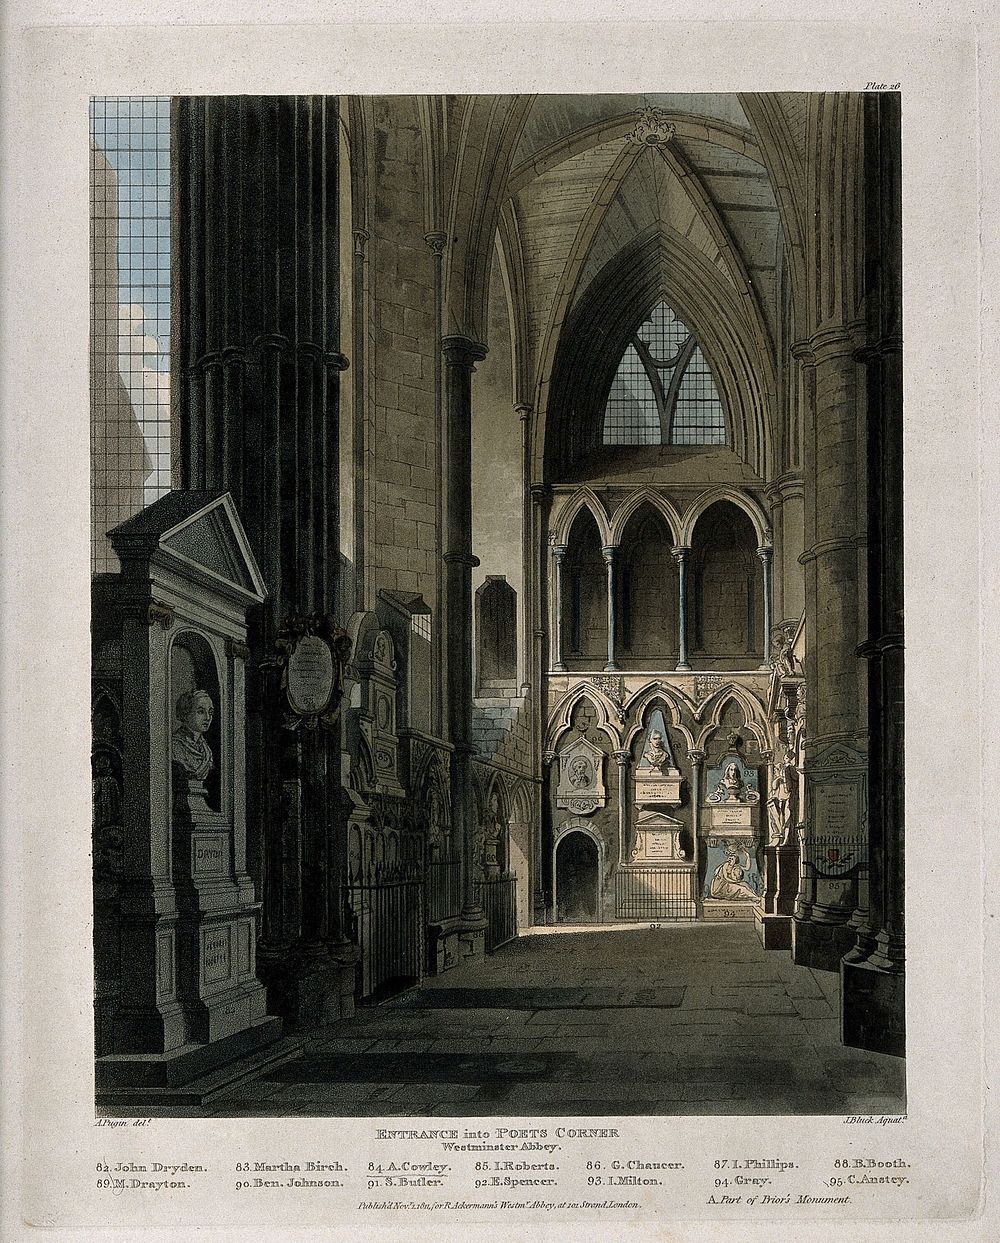 Entrance to Poets' Corner Westminster Abbey showing the busts of John Dryden, Ben Johnson, Abraham Cowley and others.…